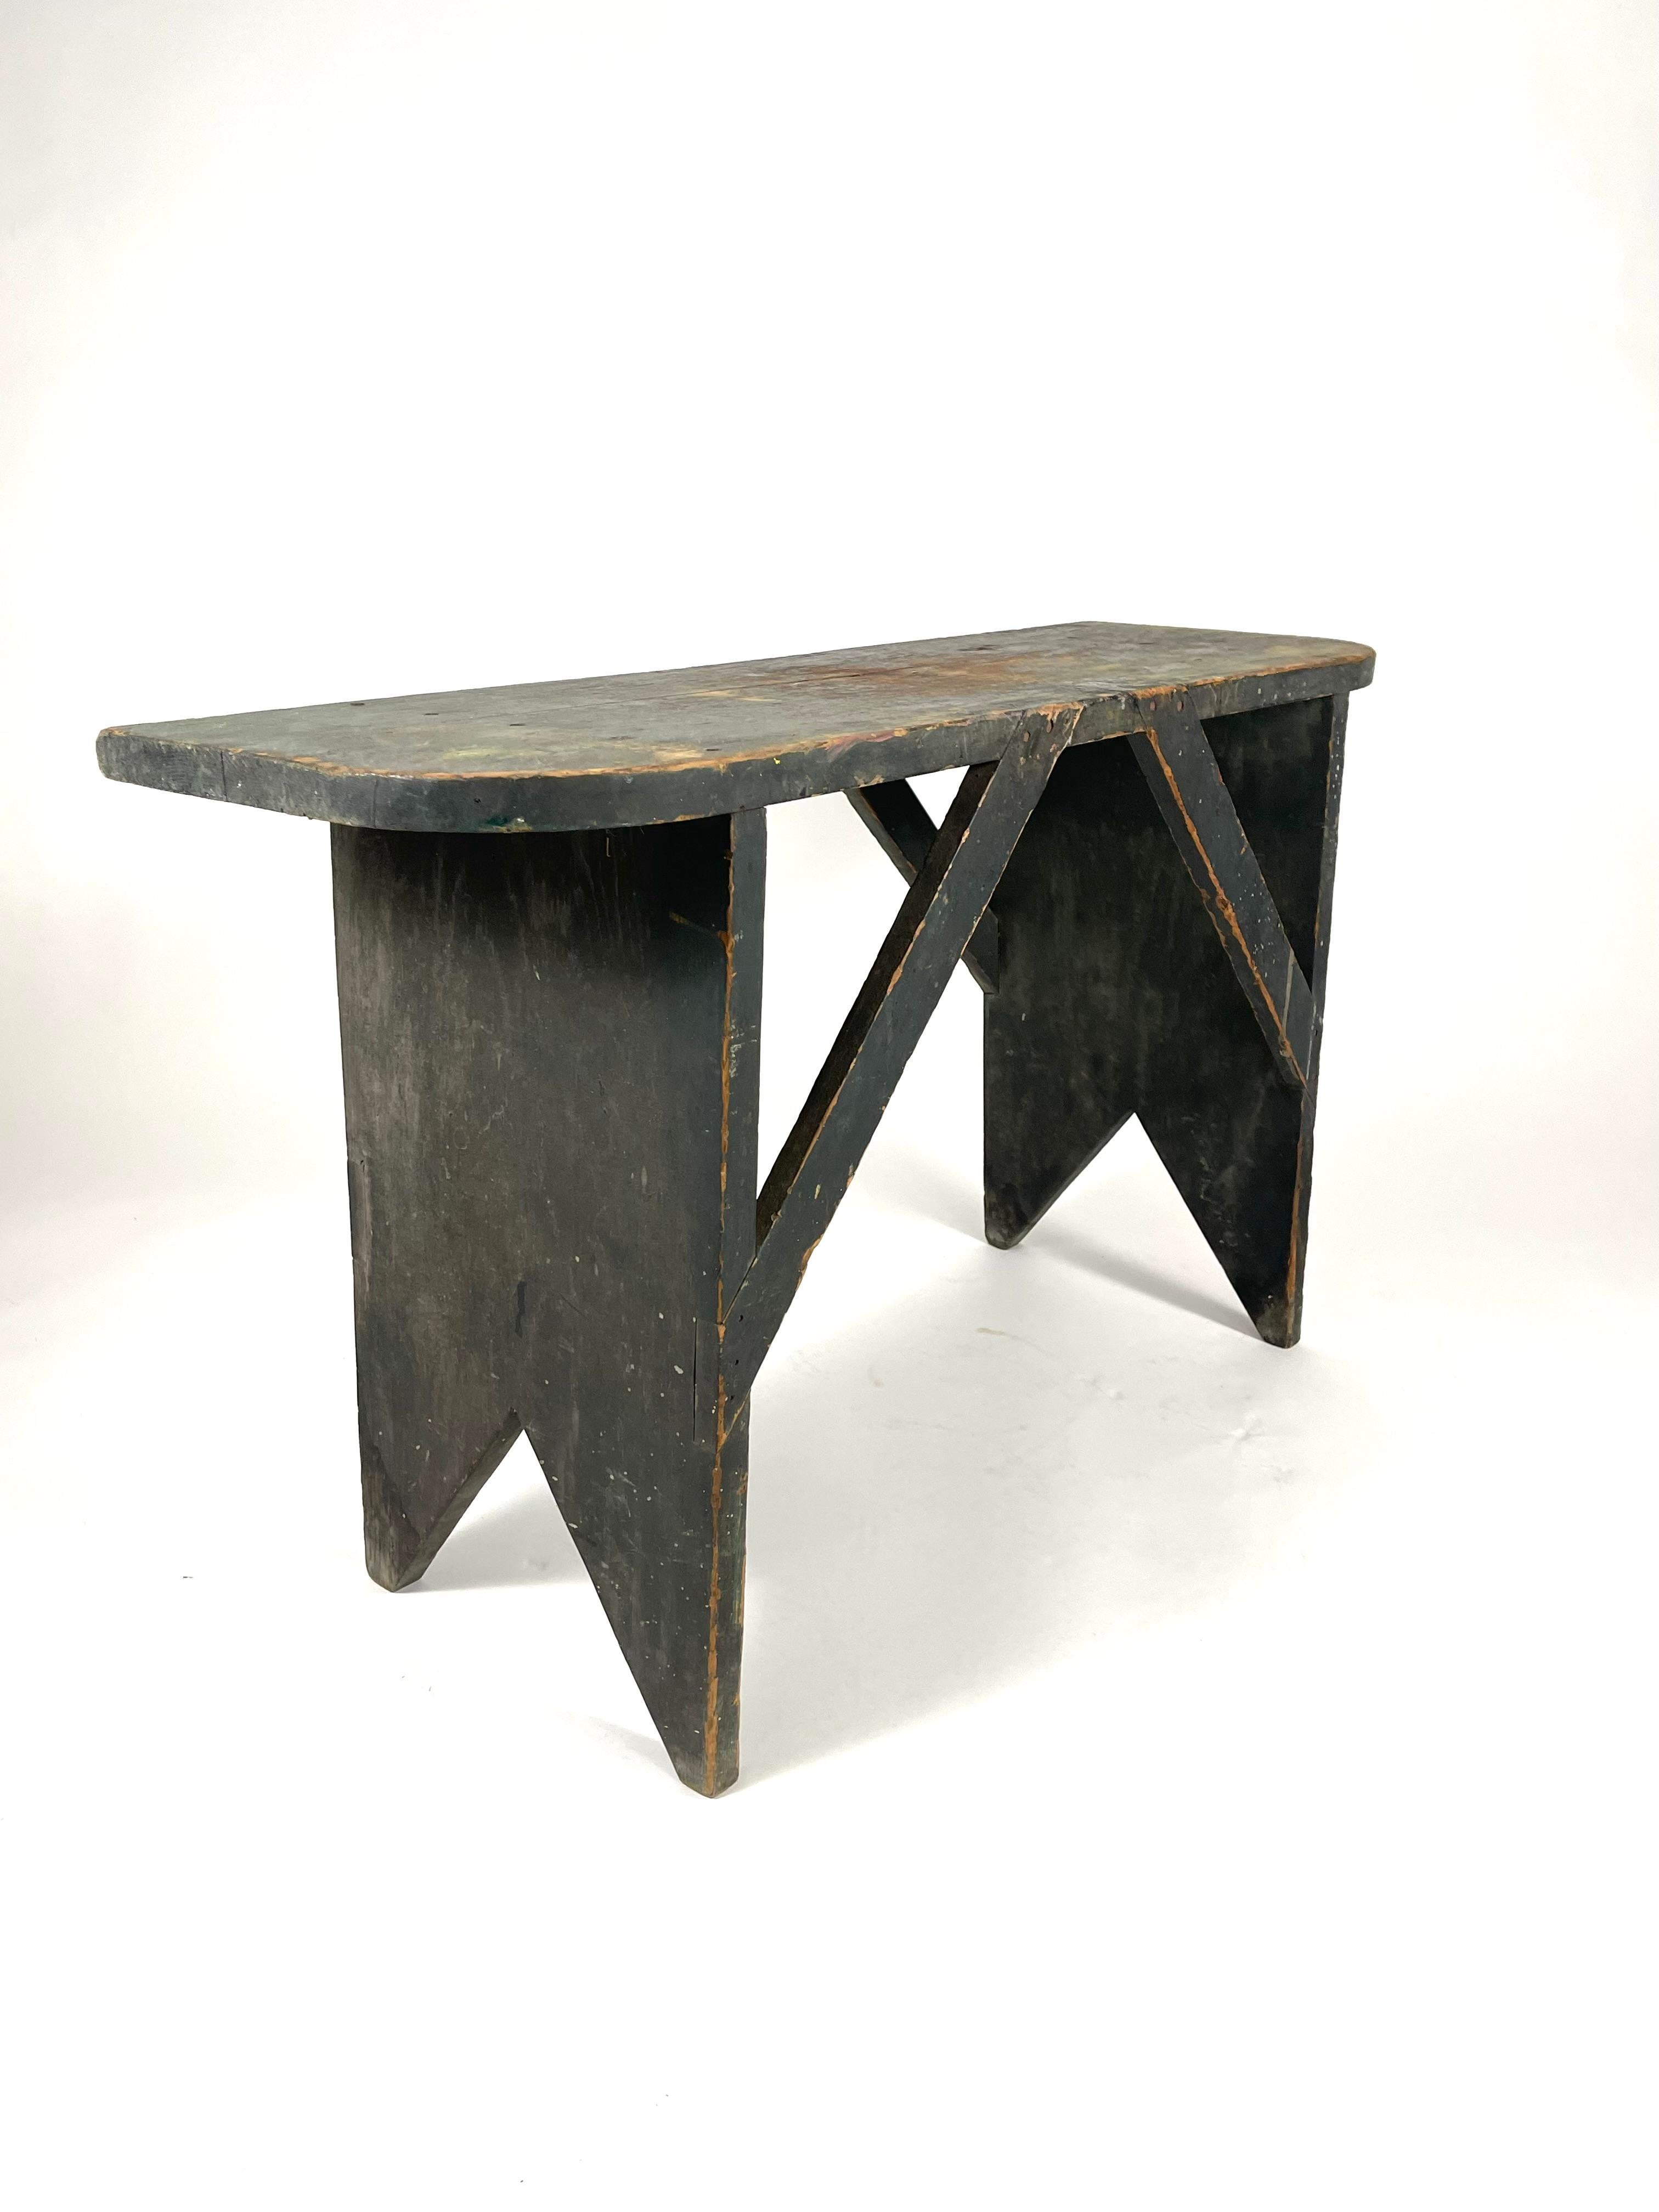 Pine 19th Century Bucket Bench or Table in Old Green Paint